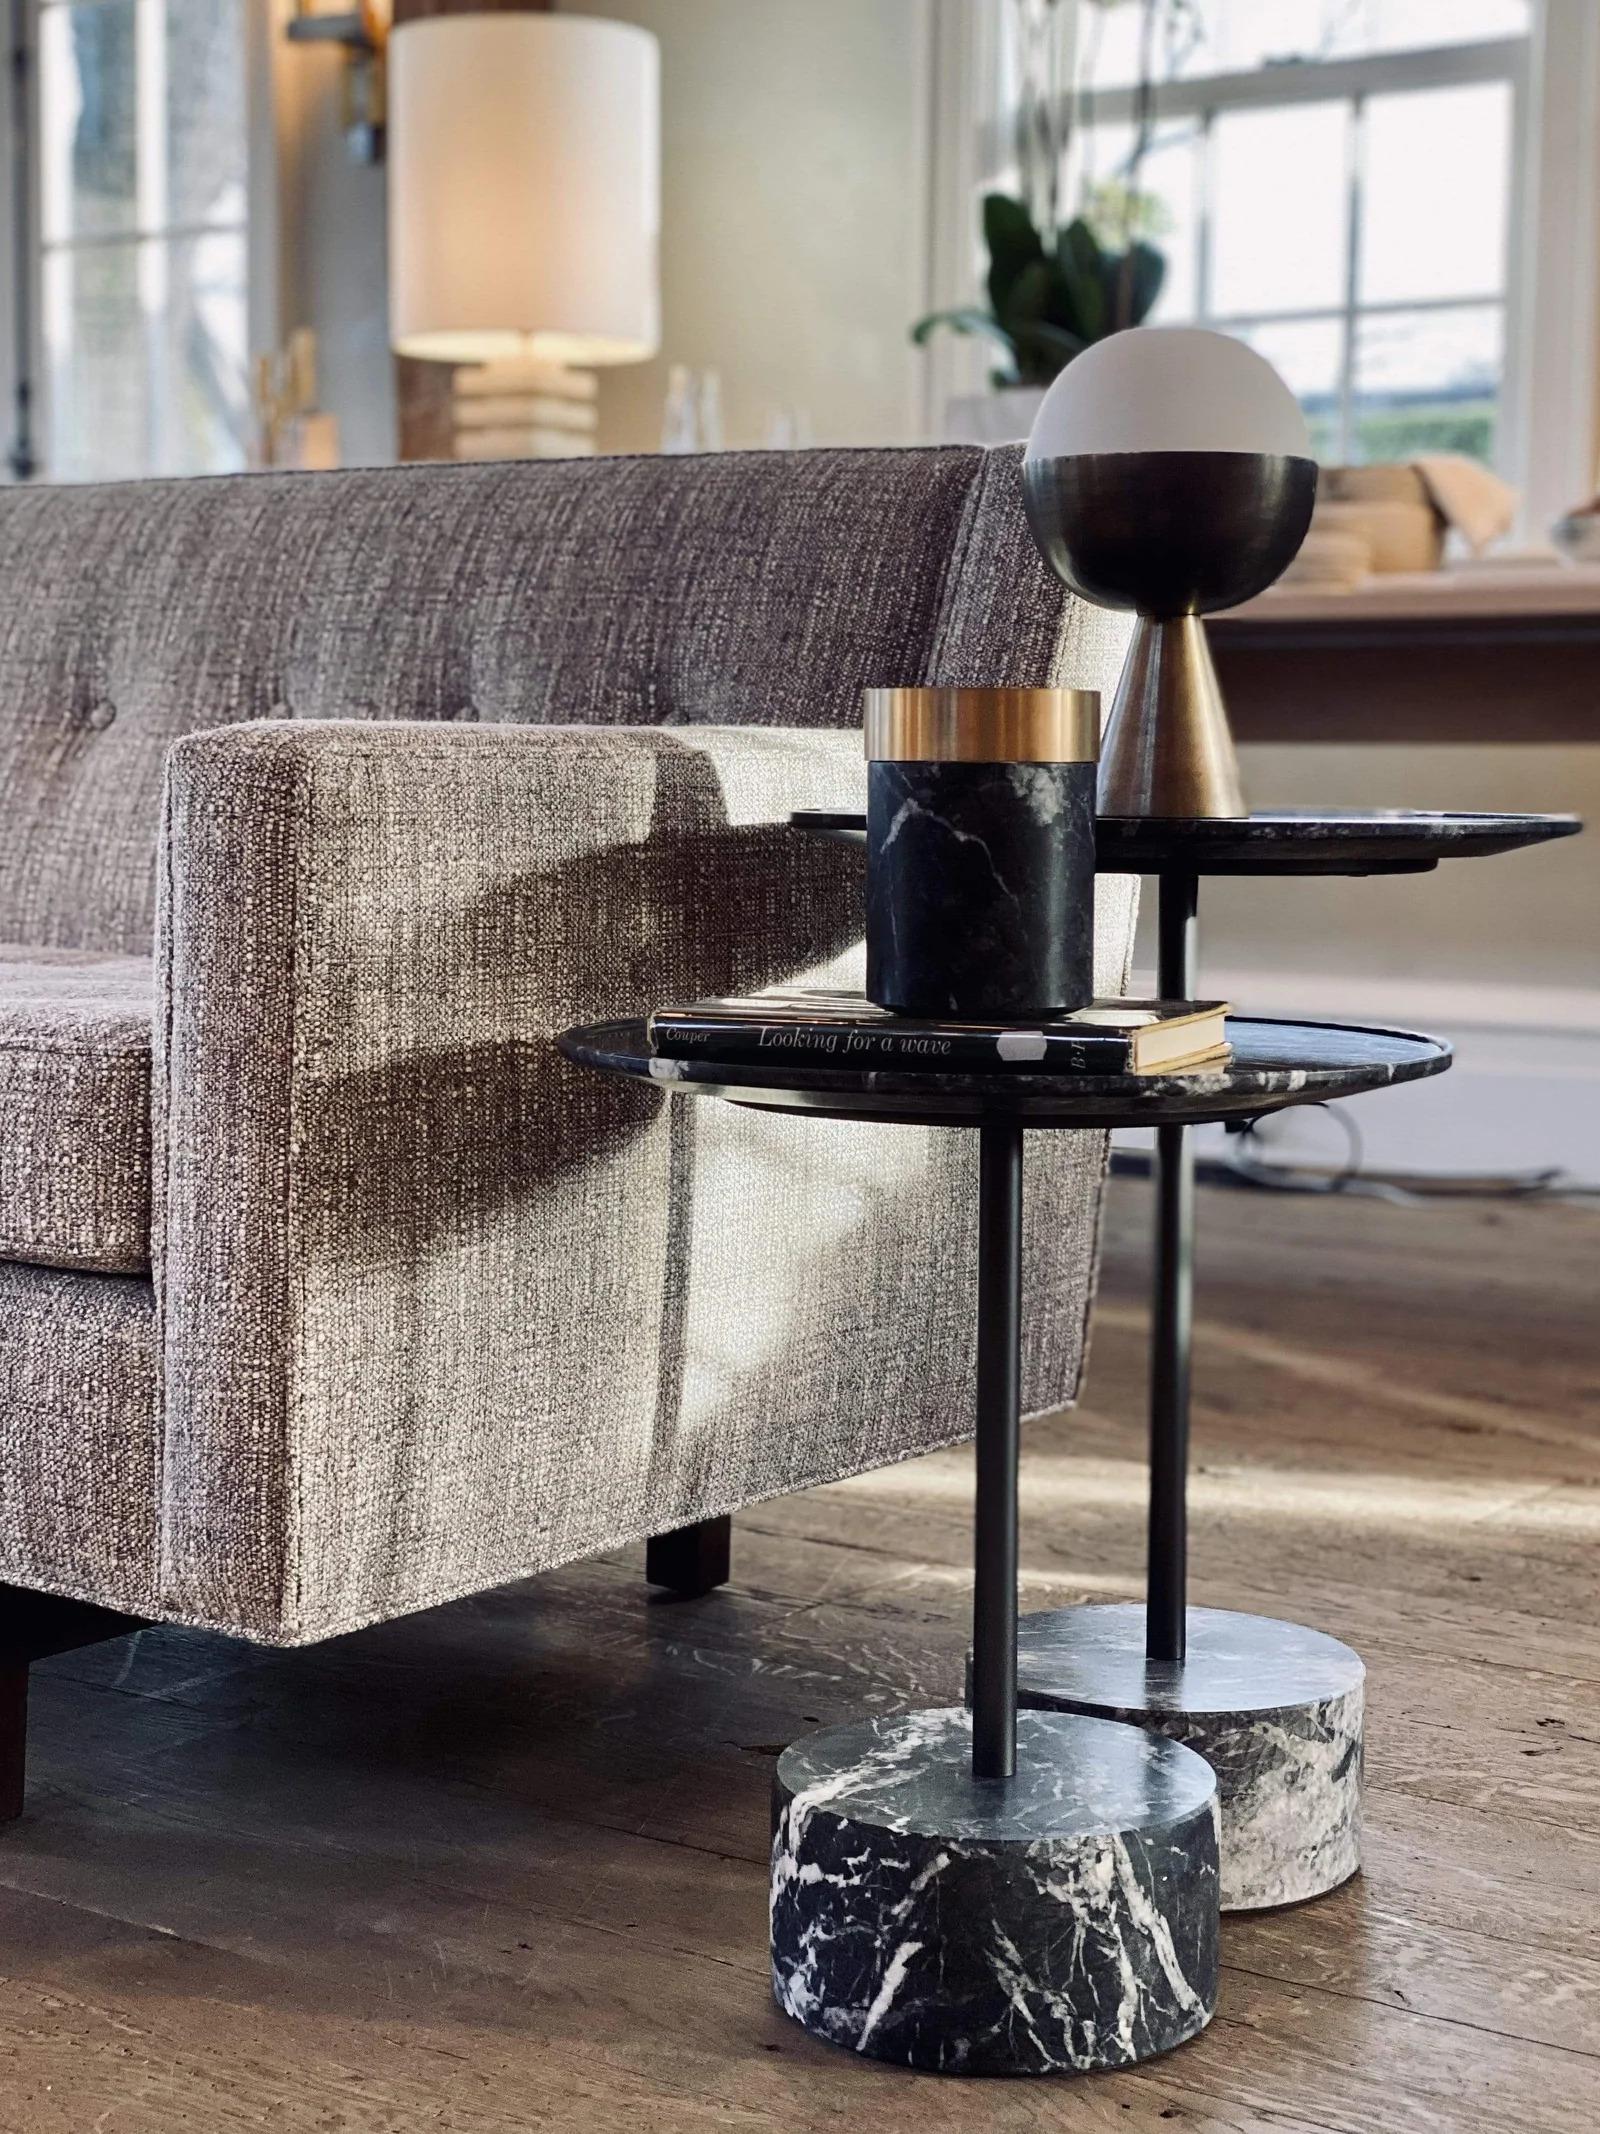 Cassina was established in 1927 in the Northern region of Brianza, Italy, an area noted for its skilled artisans and woodworkers. Rooted in high quality Italian craftsmanship Cassina began acquiring licenses to reproduce some of the worlds most well